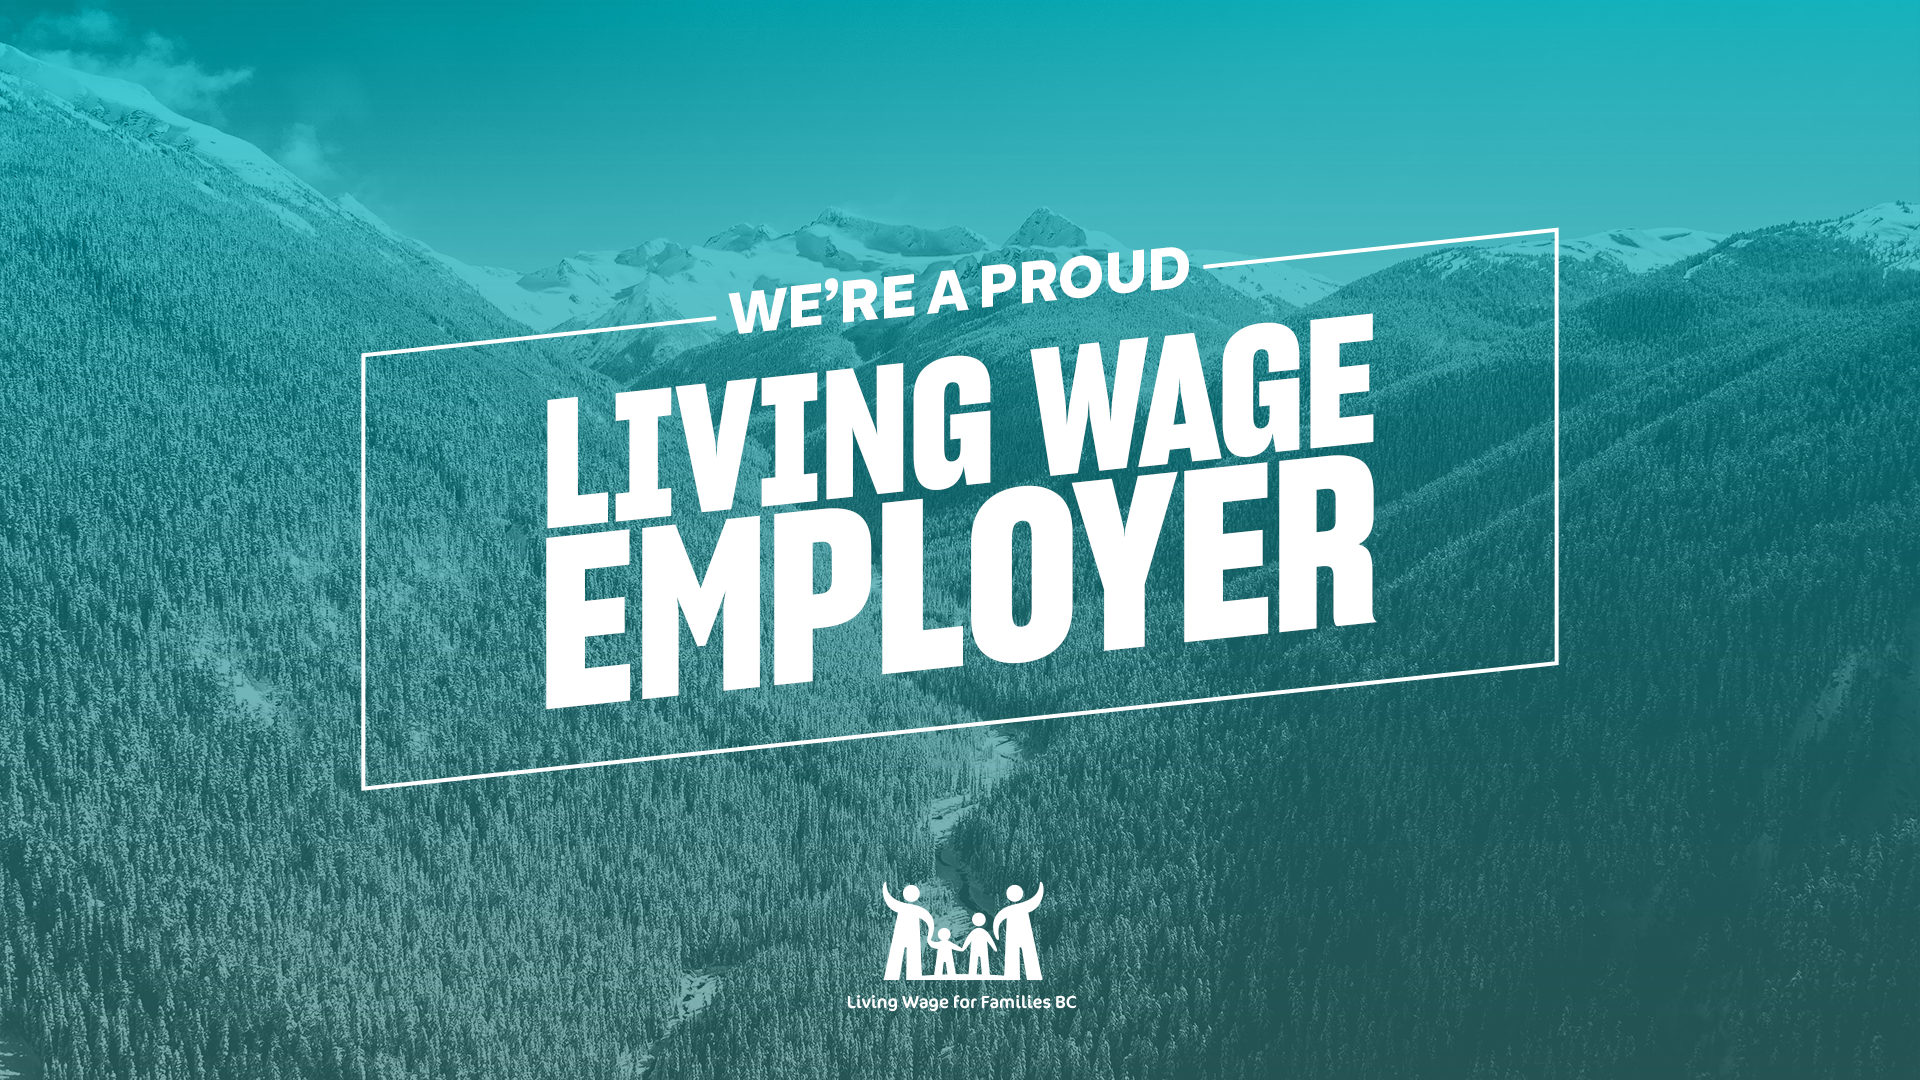 We're a proud Living Wage Employer